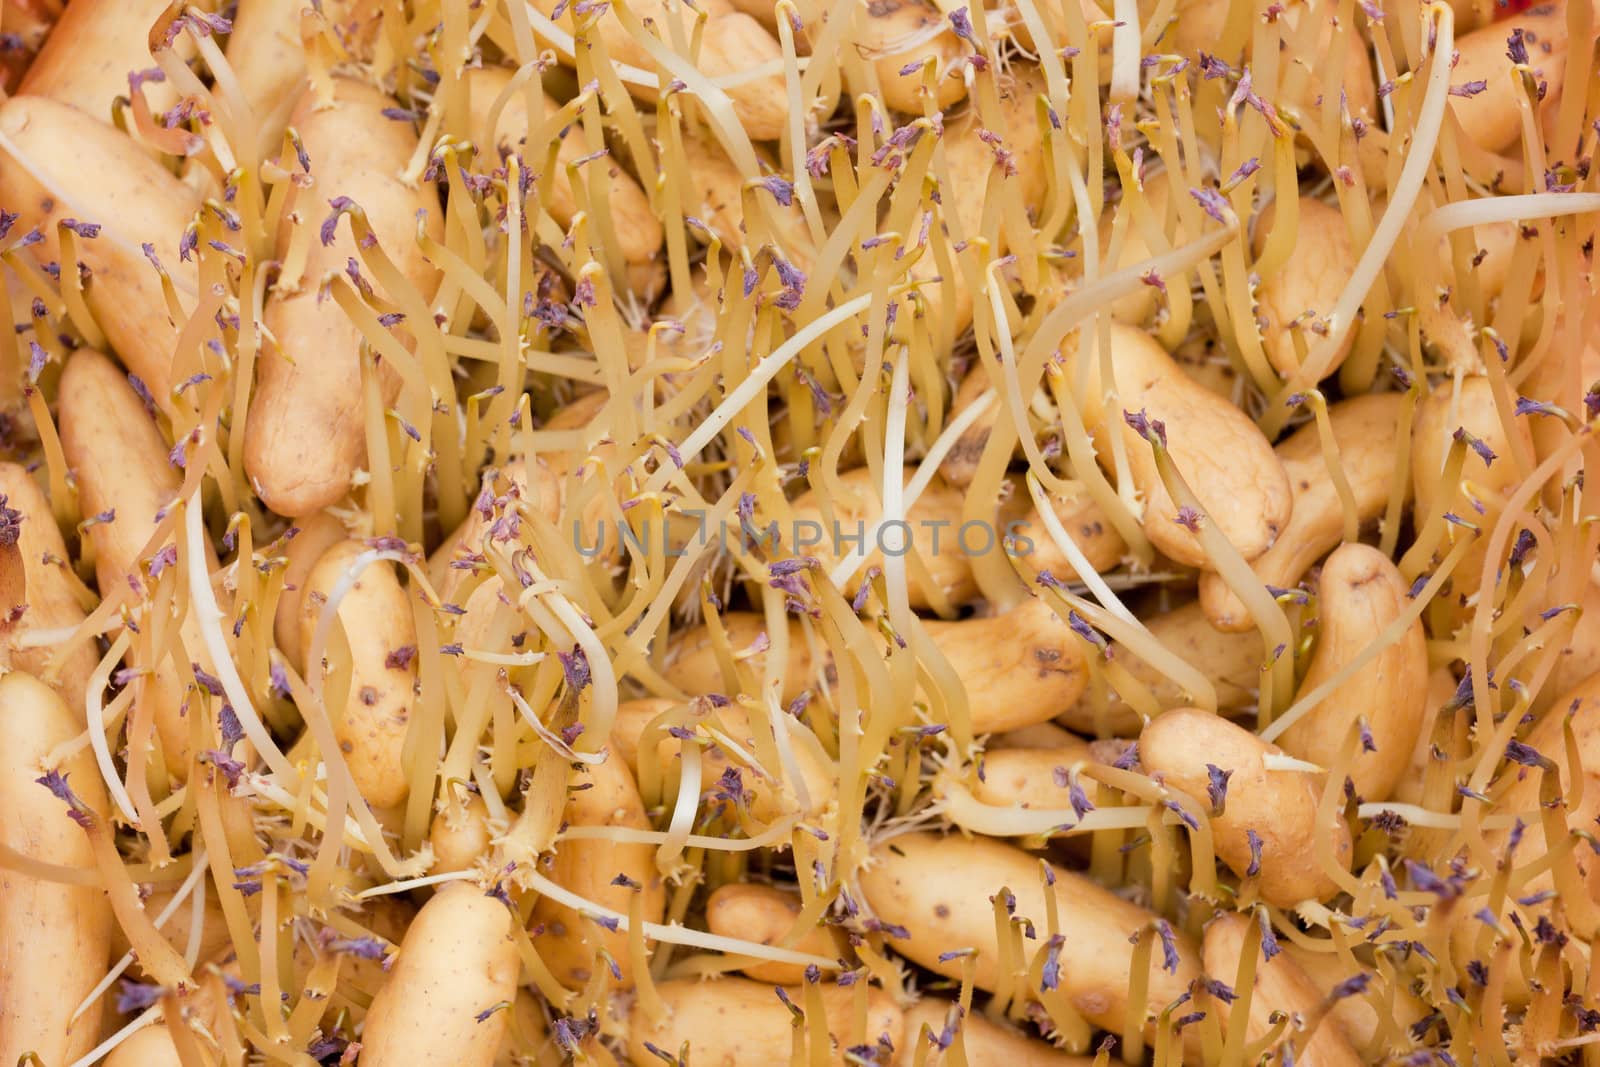 Russian Banana Fingerling seed potatoes sprouting and more than ready to be planted farming agriculture background texture pattern